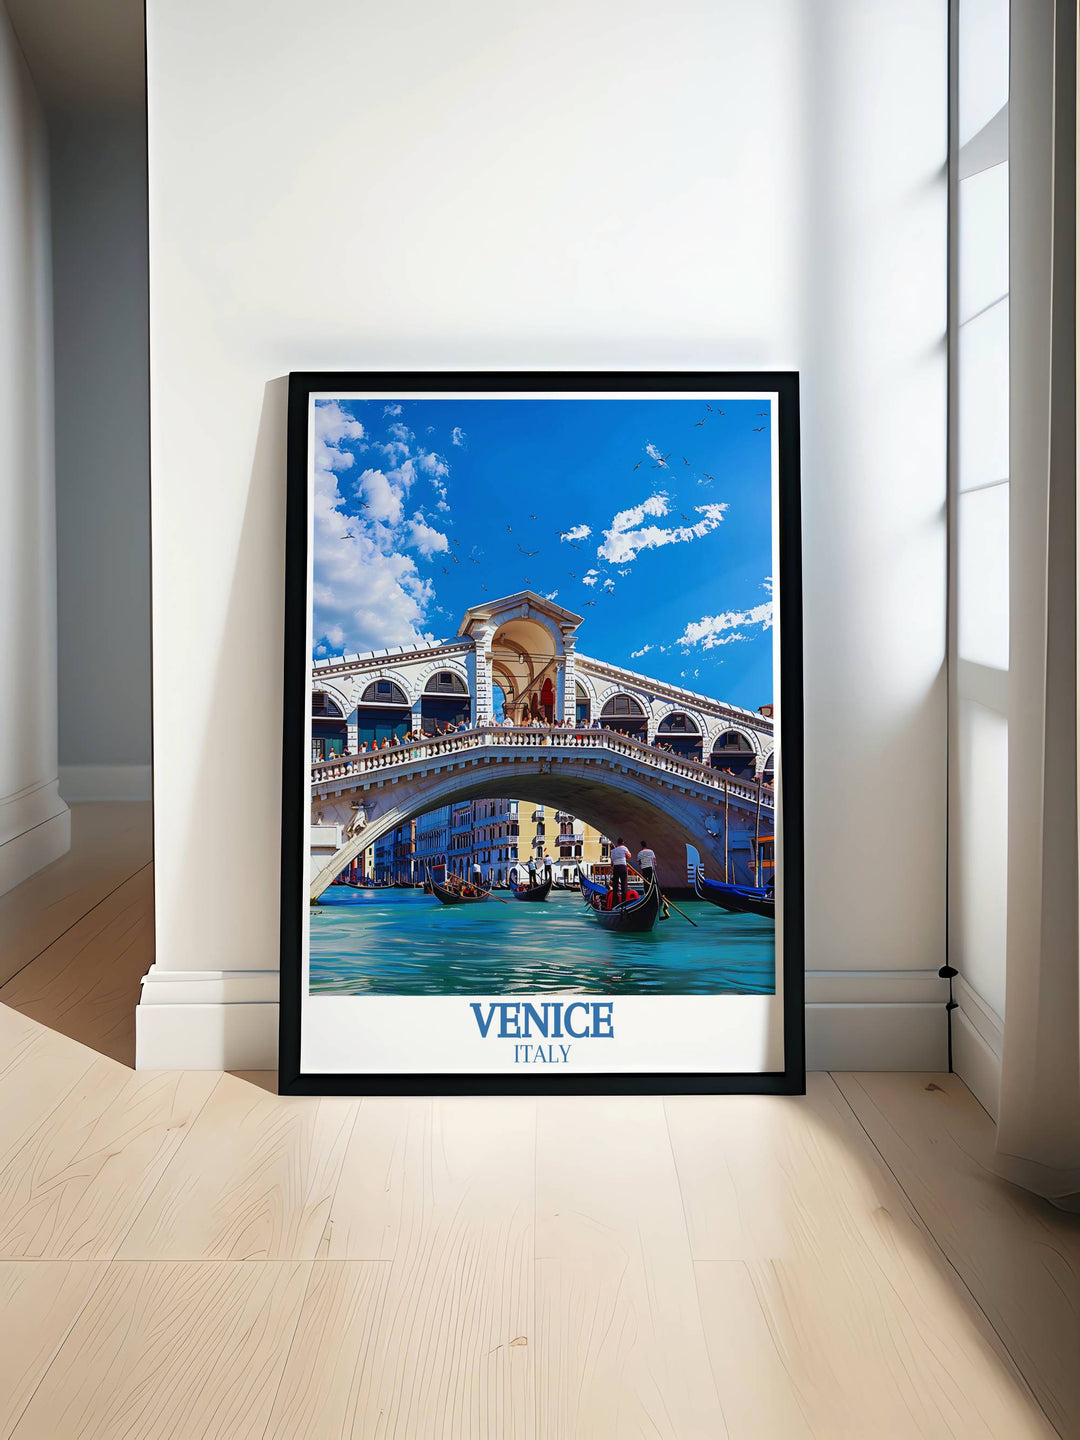 Modern wall decor of the Rialto Bridge in Venice showcasing the elegance and history of one of Italys most iconic landmarks